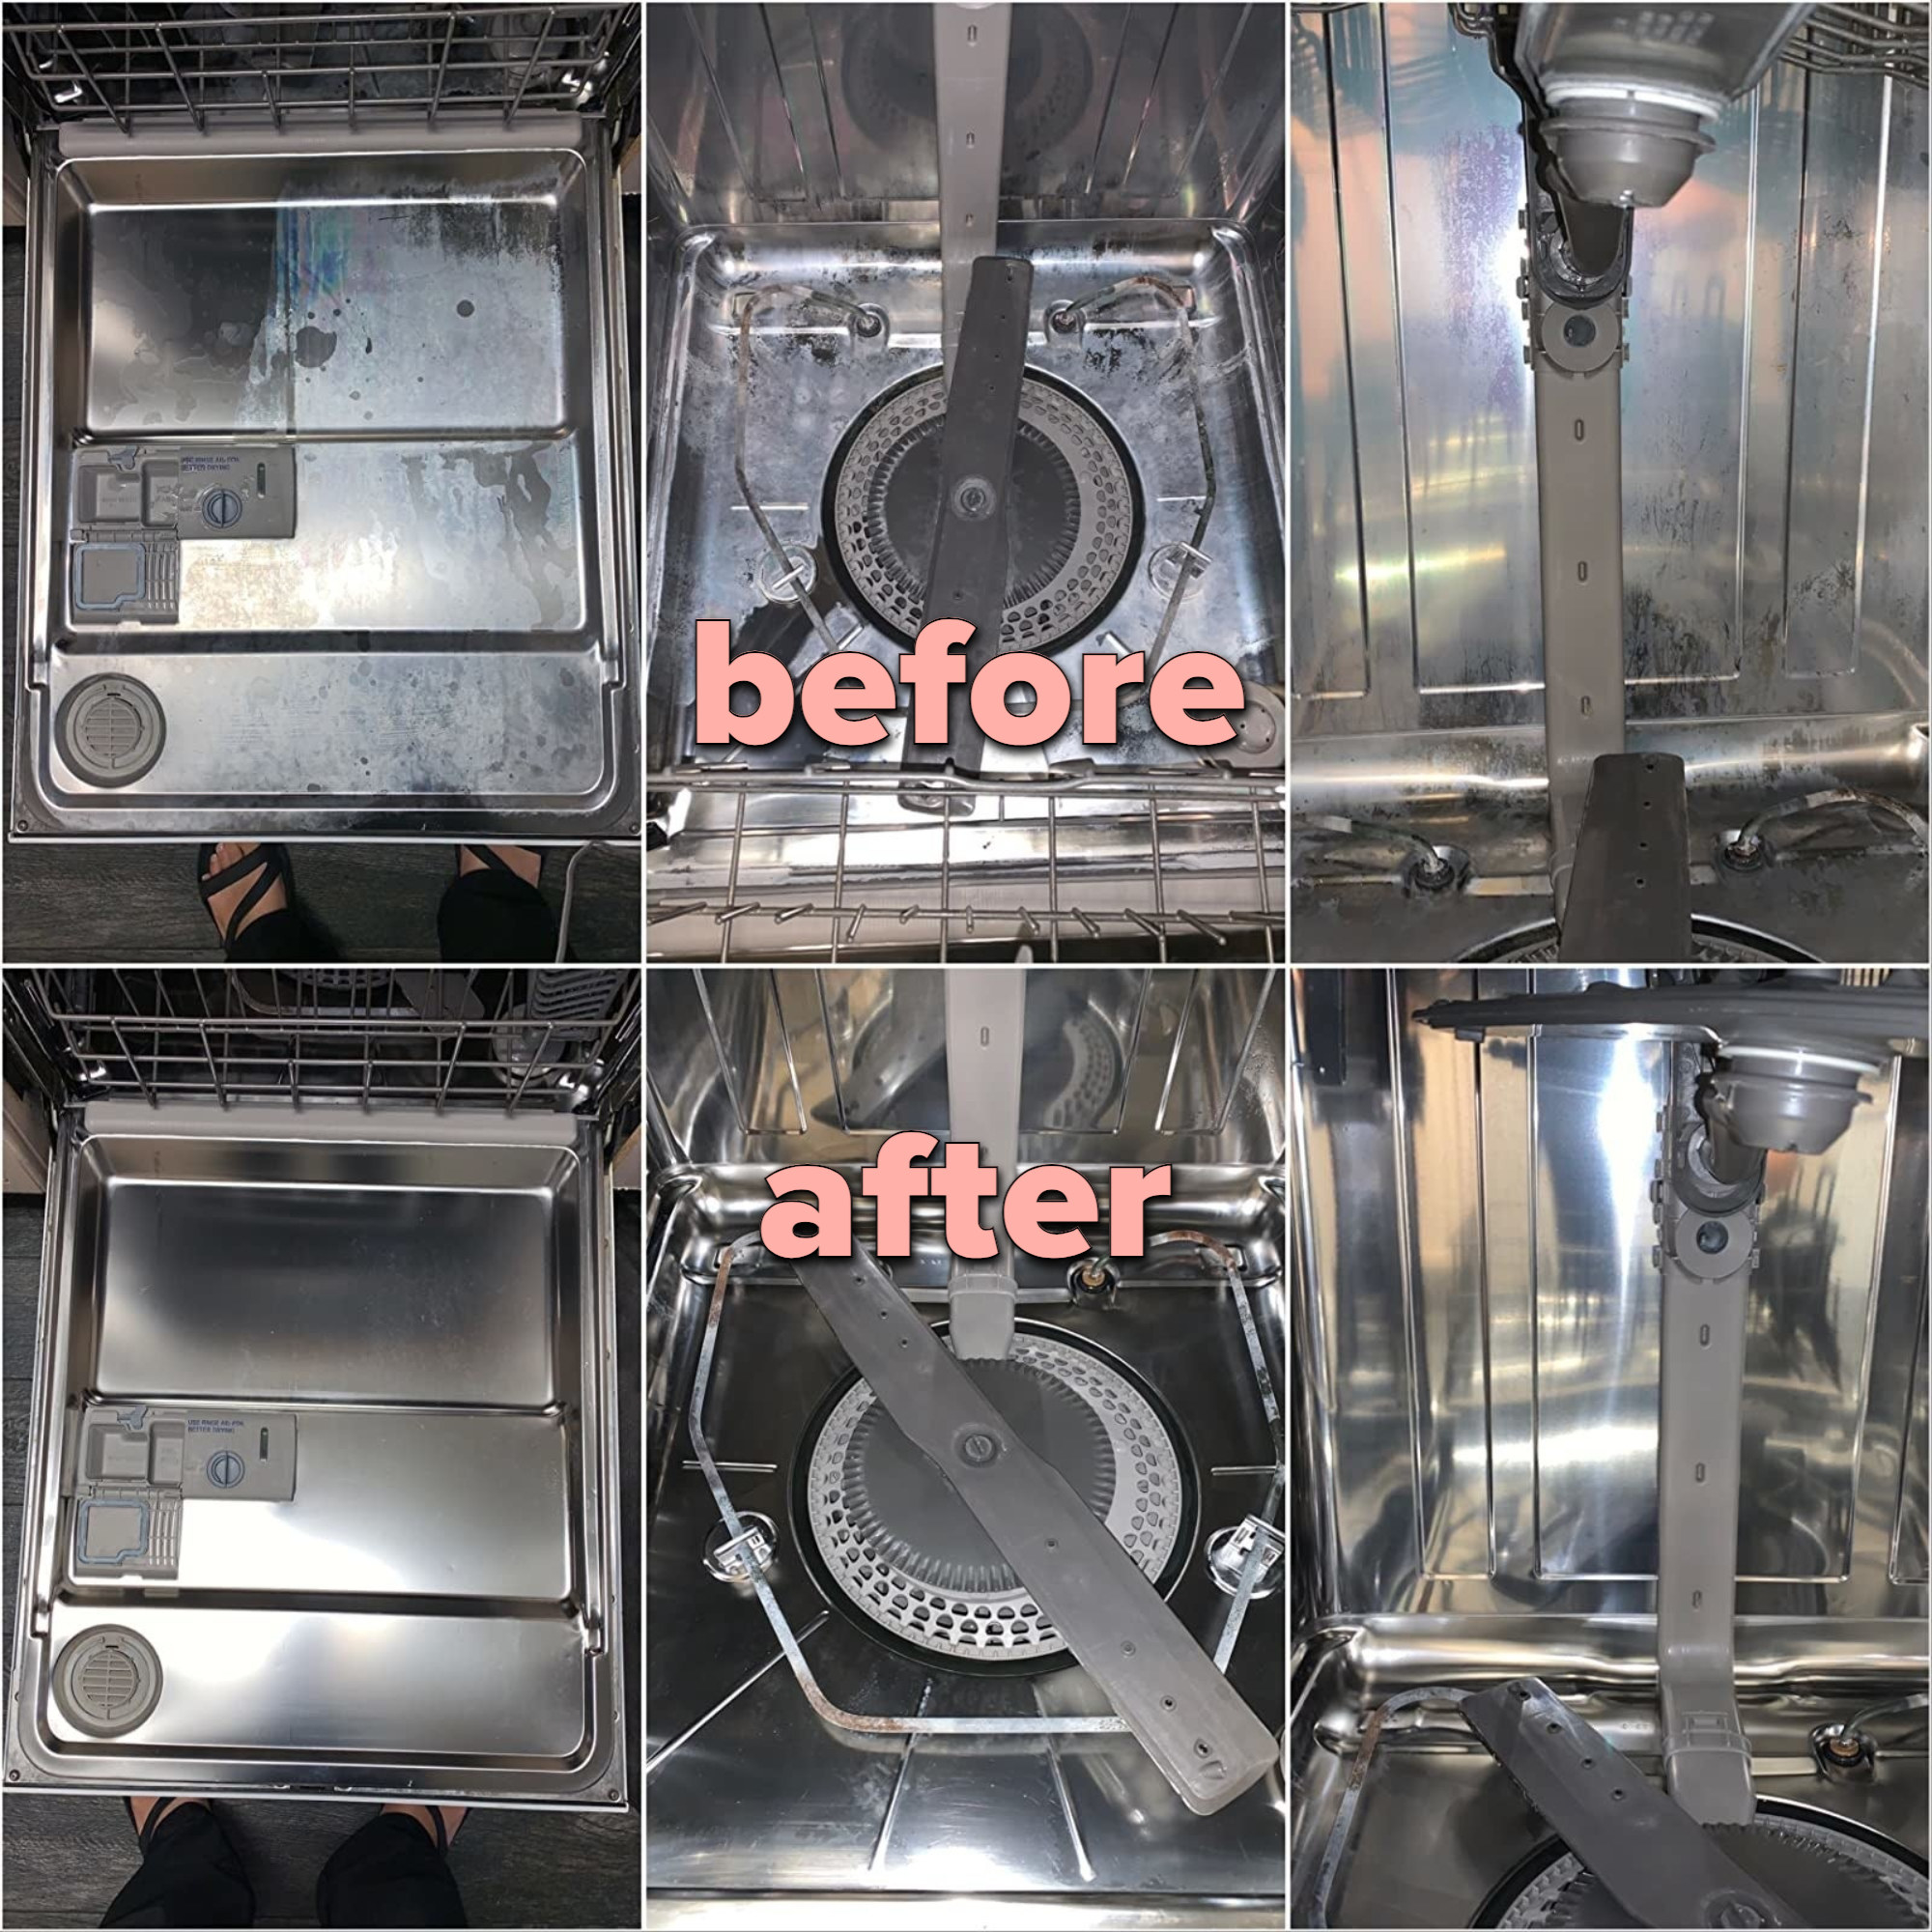 a before and after photo of a dirty dishwasher and a clean dishwasher after using the product